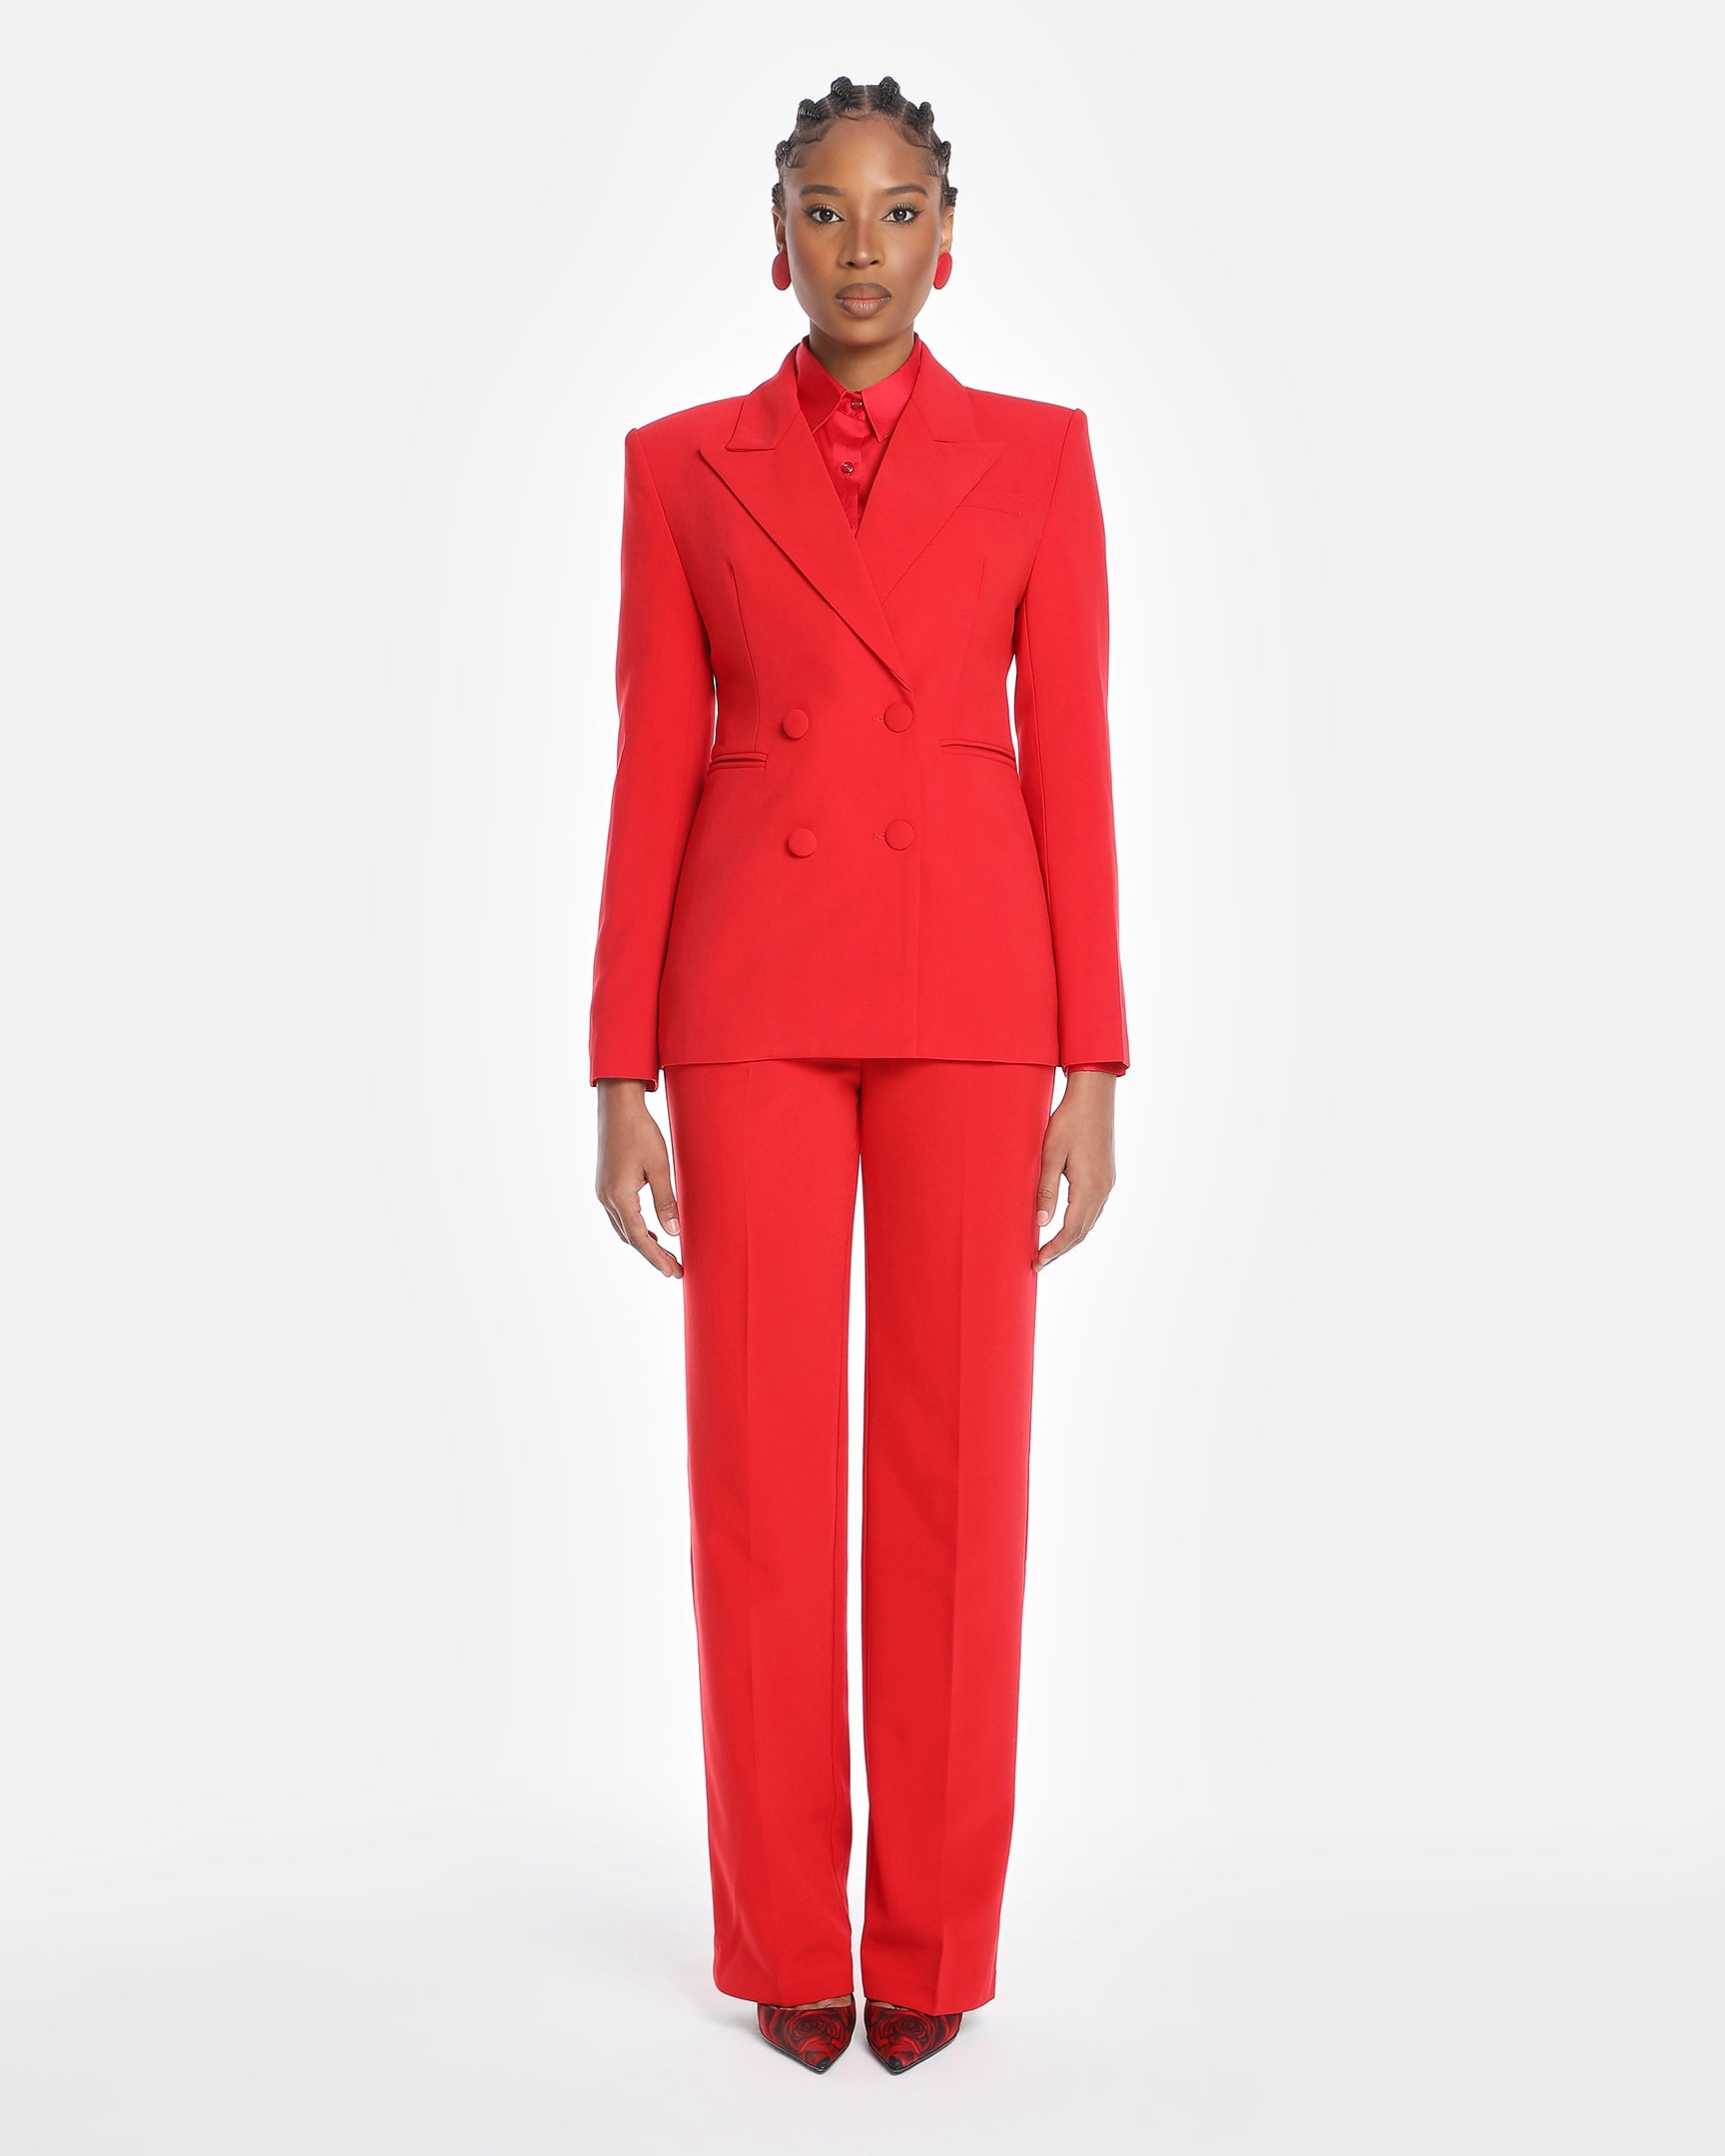 Lady's Red classic suit